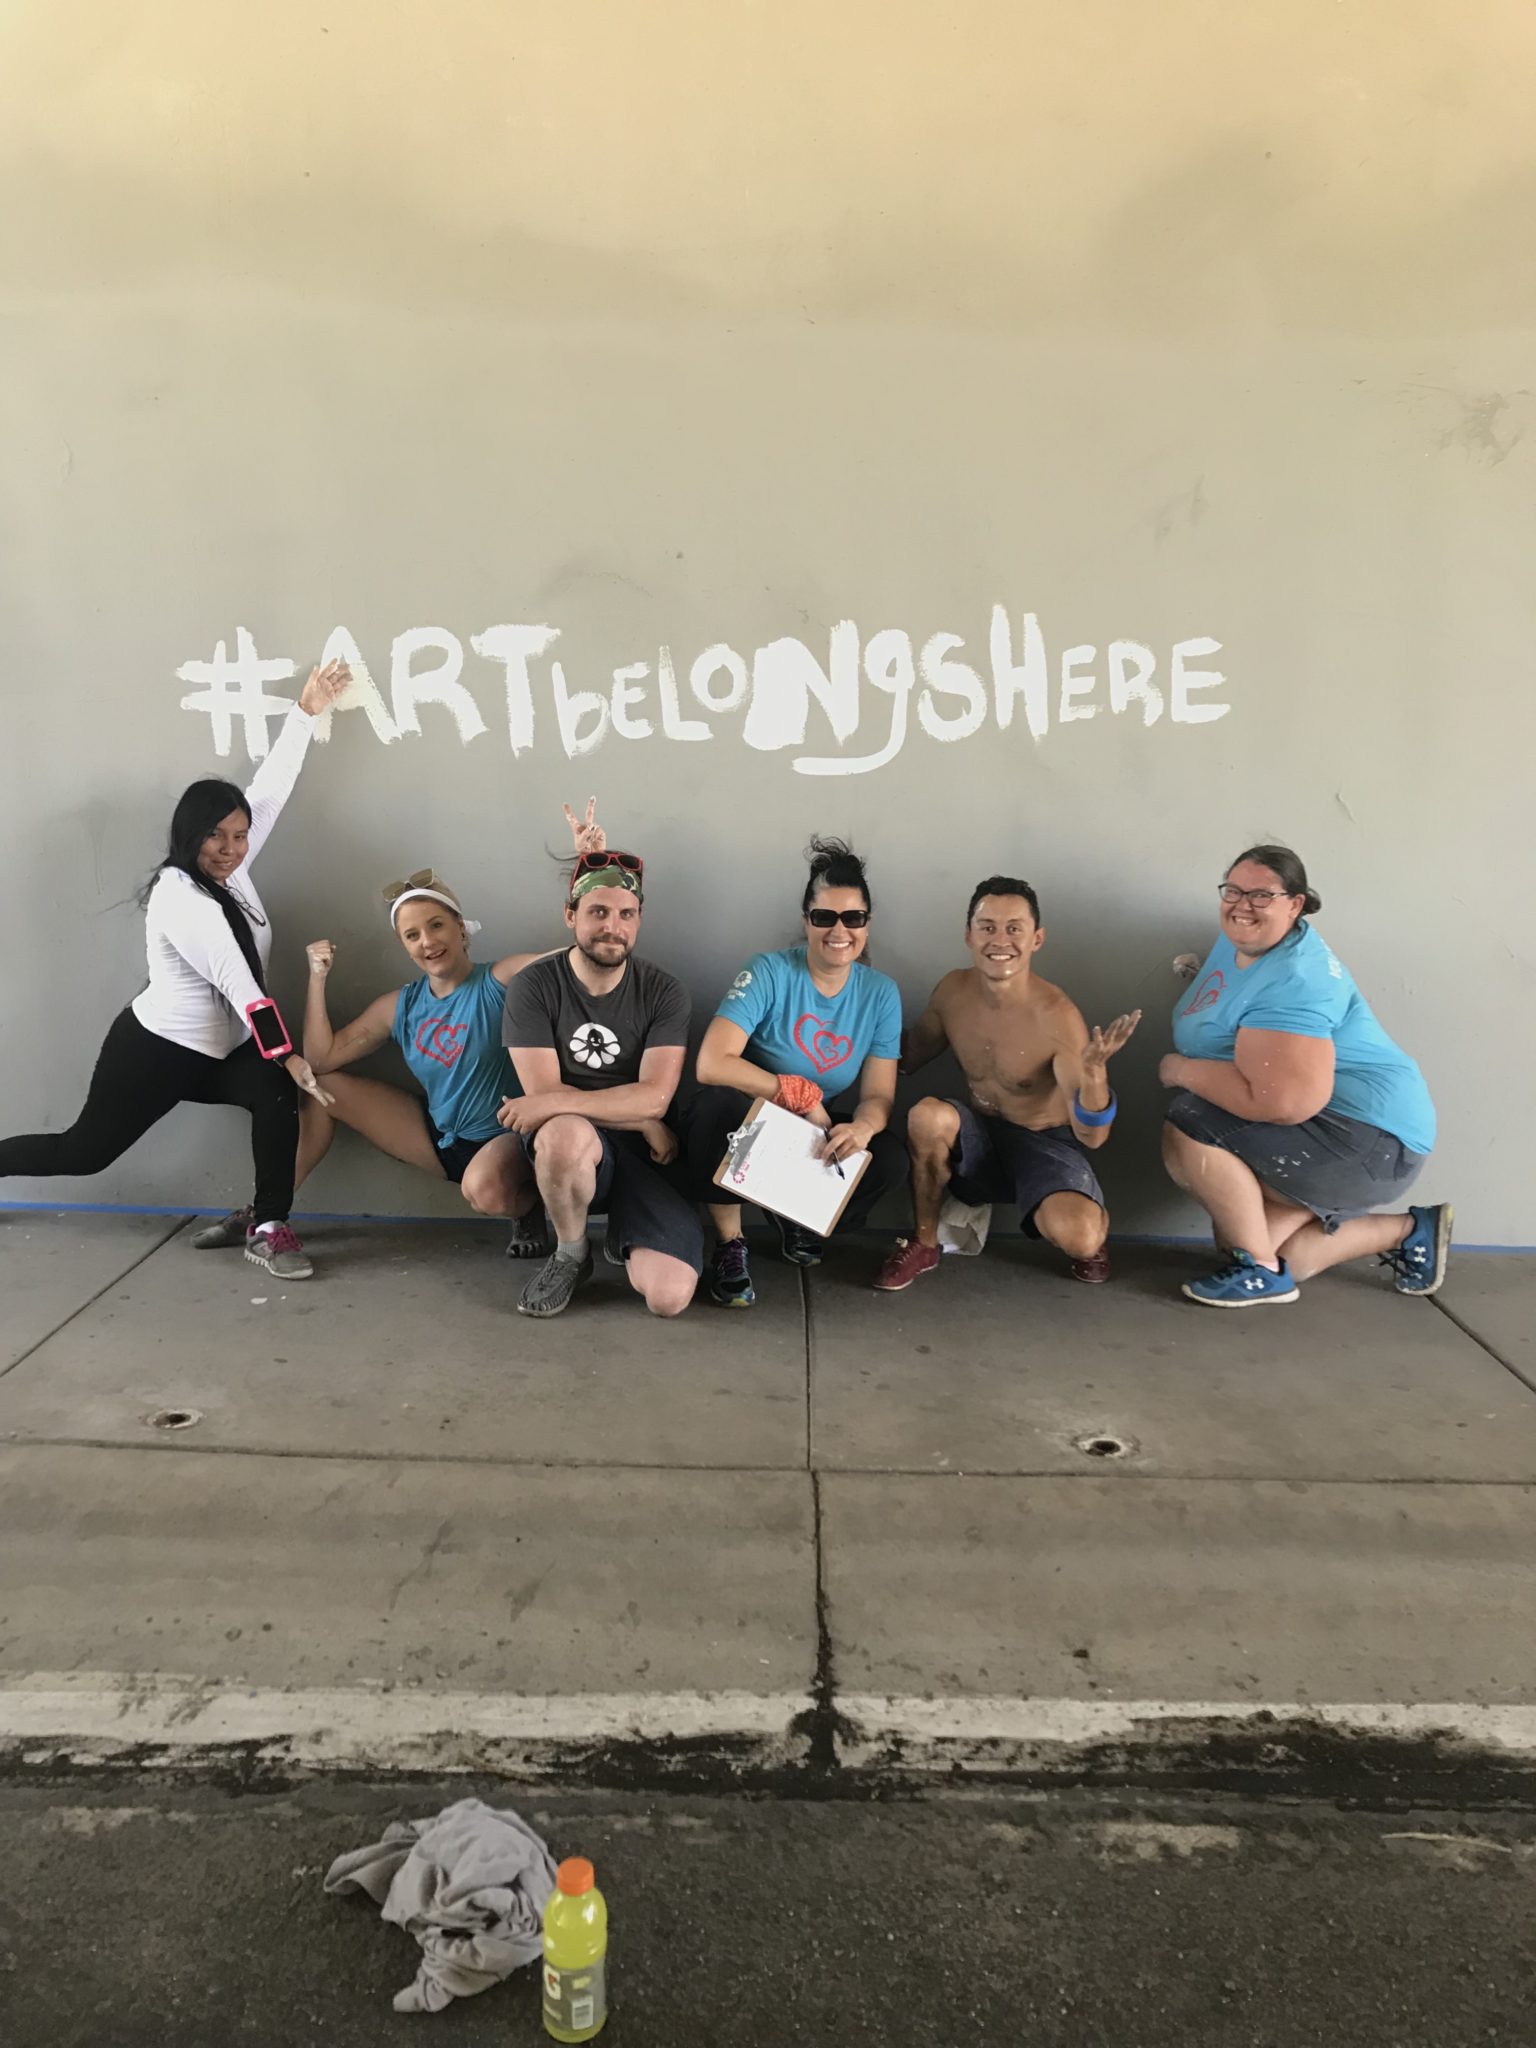 Six people kneel in front of a wall that has the words "Hashtag ART Belongs Here" painted on it.